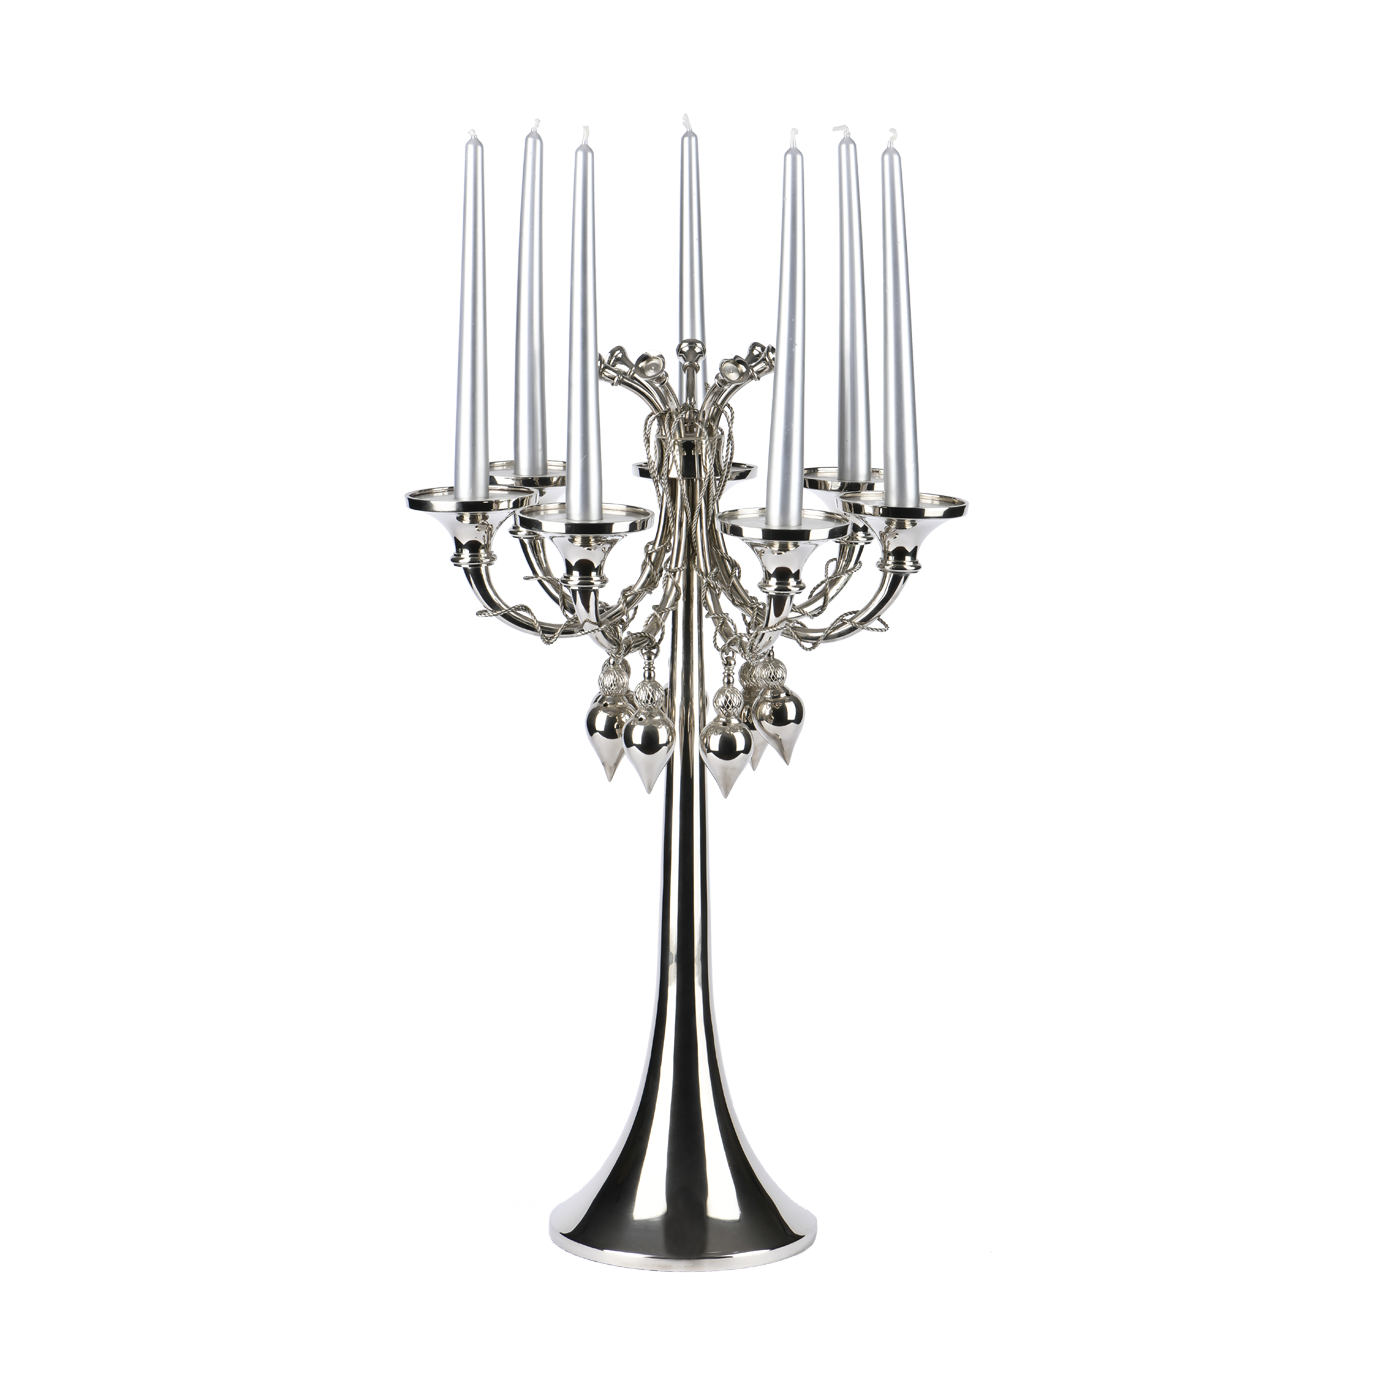 7 ARMS NICKEL CANDLESTICK